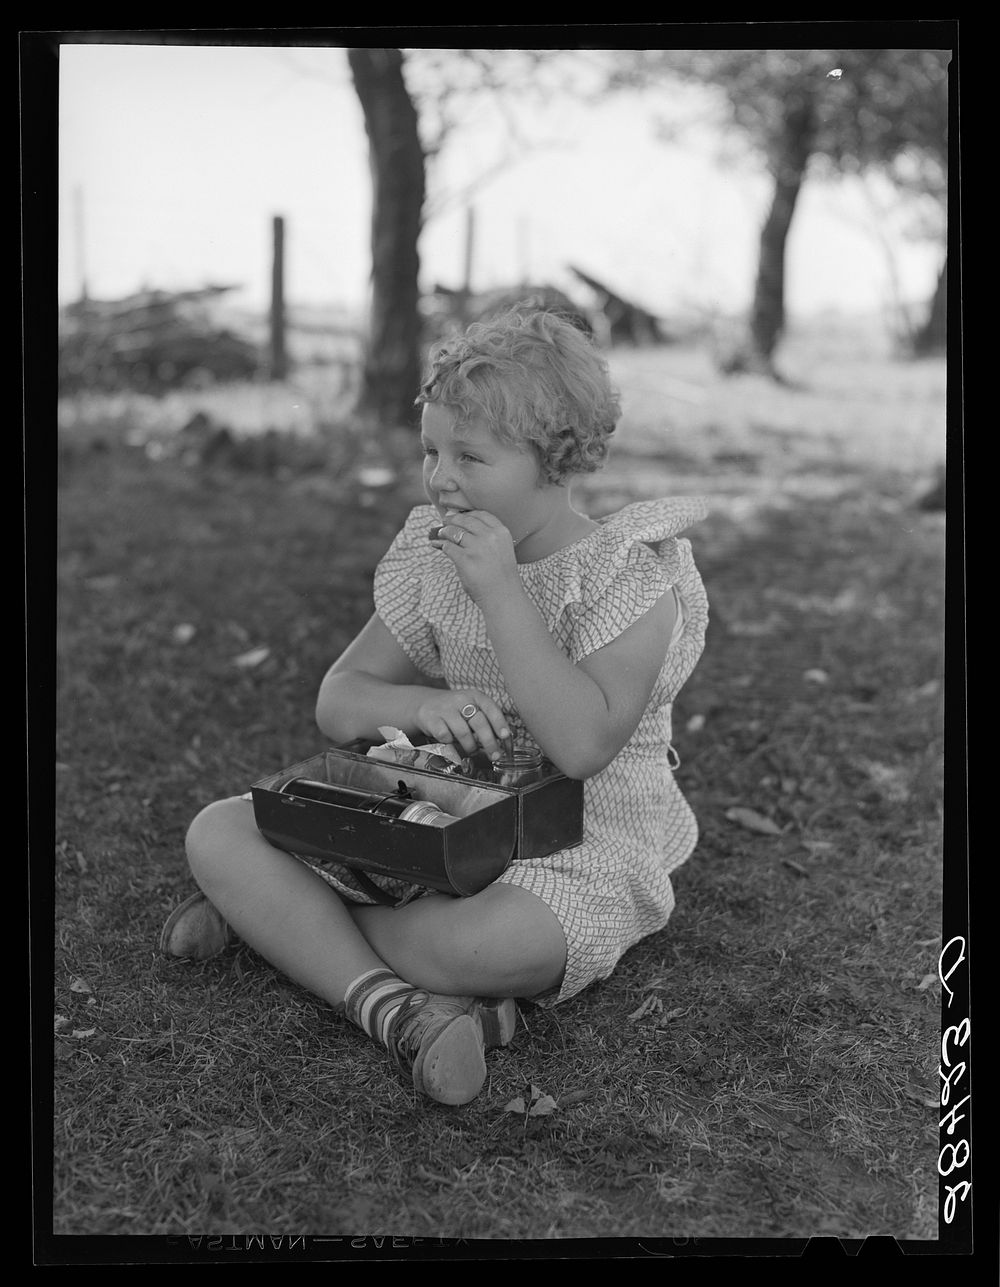 Schoolgirl, pupil of one-room schoolhouse, eating lunch. Grundy County, Iowa. Sourced from the Library of Congress.